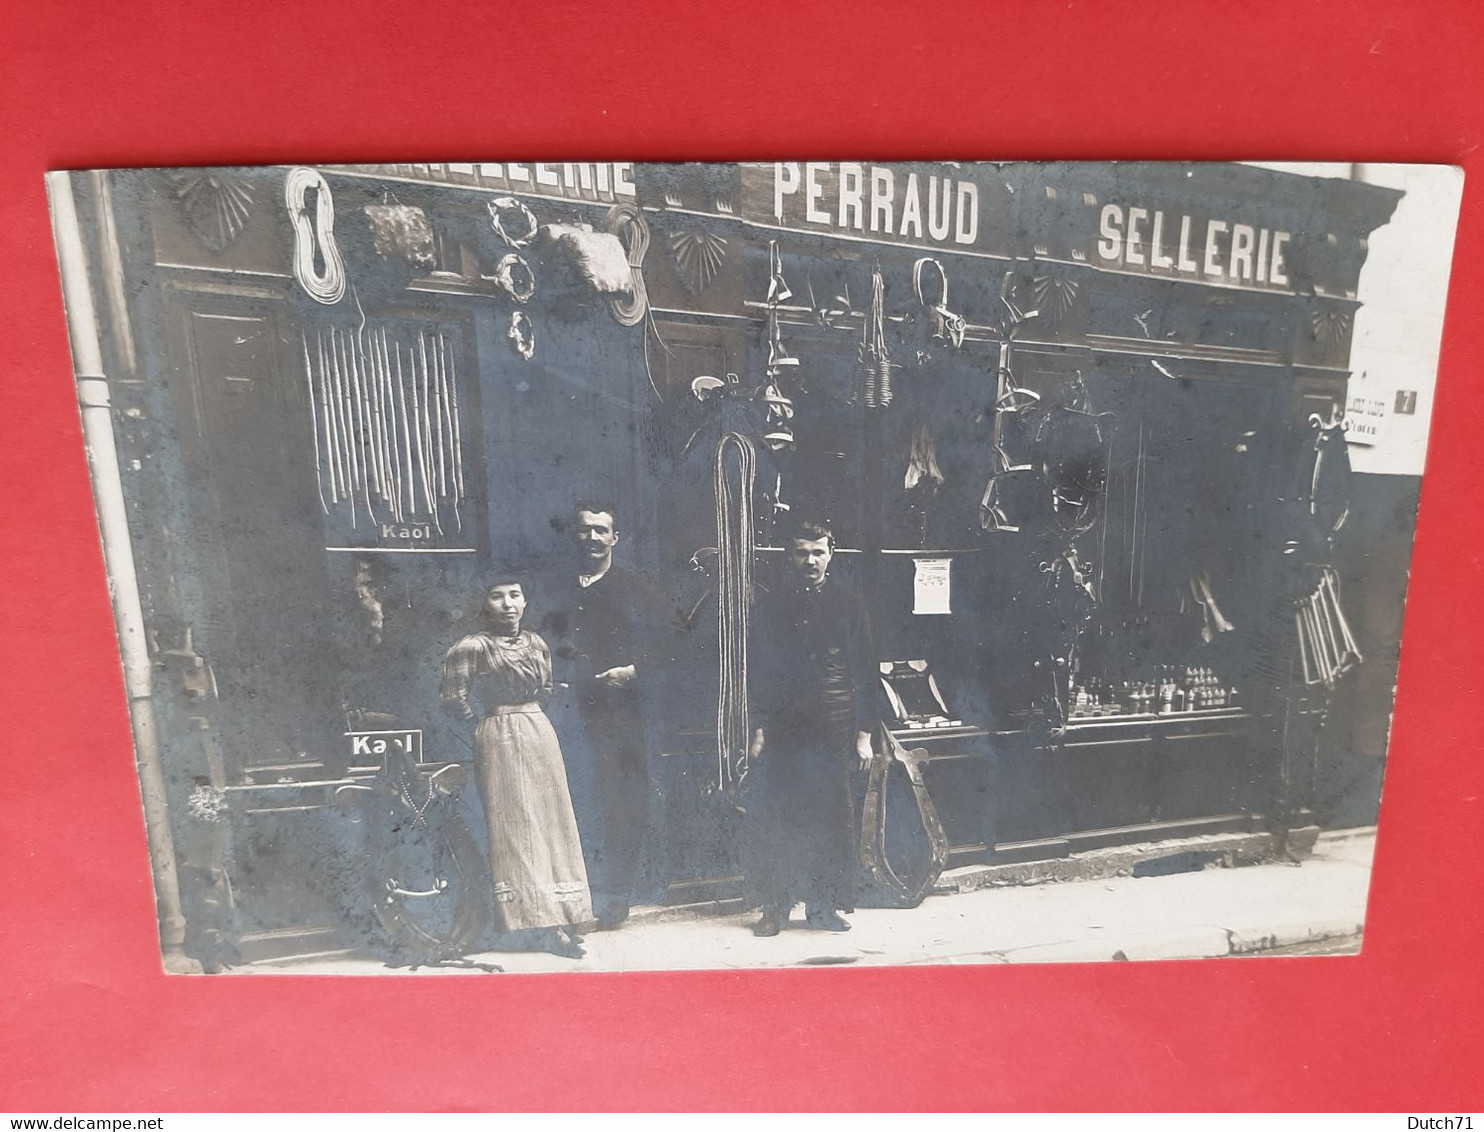 CARTE PHOTO A IDENTIFIER / BOURRELLERIE SELLERIE PERRAUD / COMMERCE / ANIMATION / DOS SCANNE - To Identify